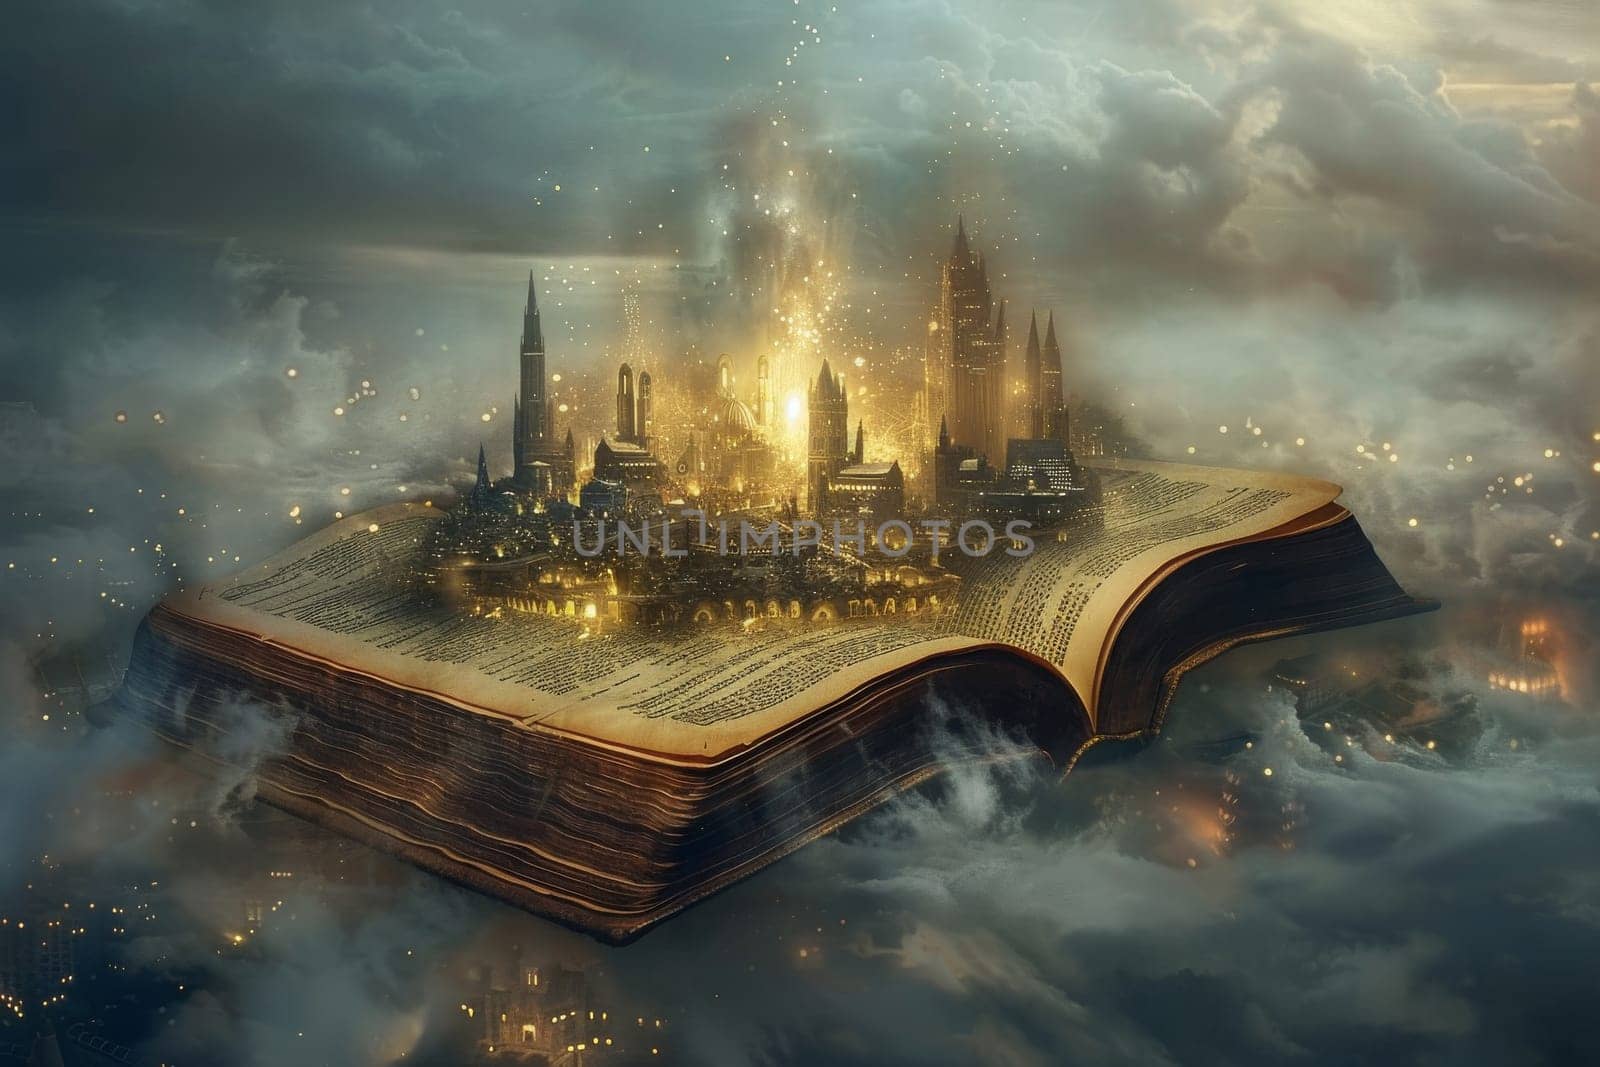 A city is shown in the middle of a book, with a large open book on top of it. The city is illuminated with lights, giving it a warm and inviting atmosphere. The scene is reminiscent of a fantasy world